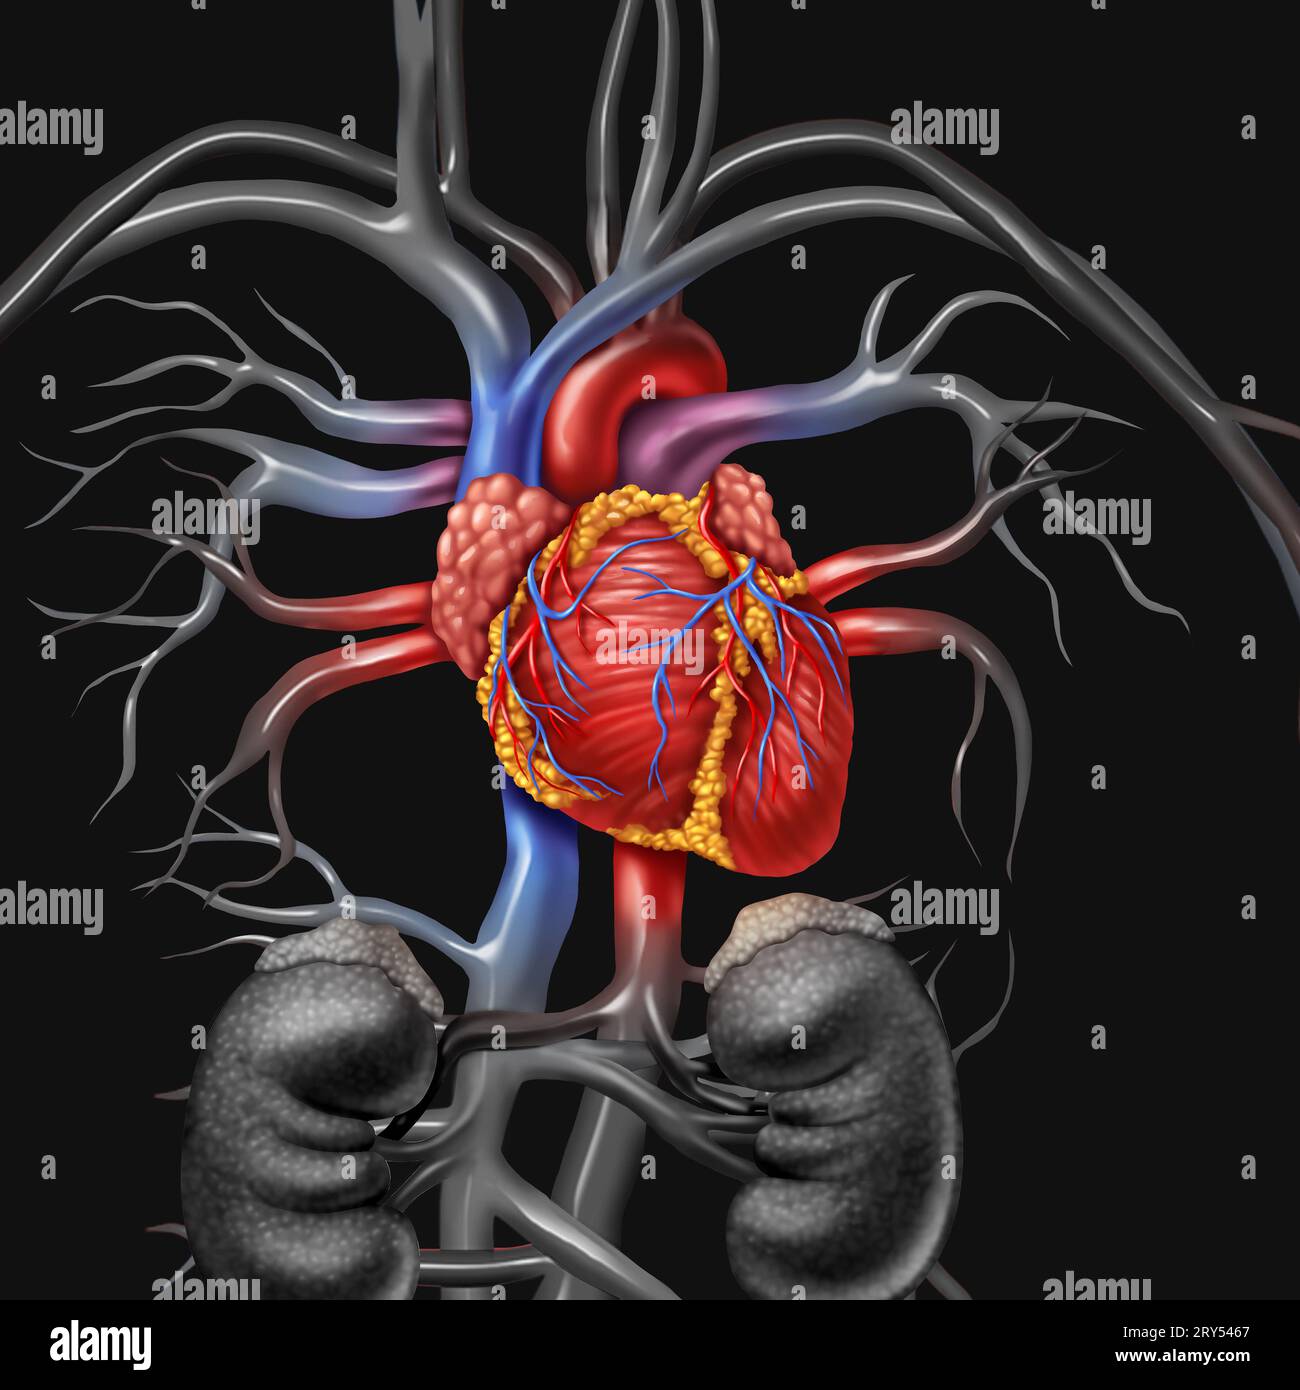 Human heart anatomy from a healthy body on a black background as a medical health care symbol of an inner cardiovascular organ Stock Photo